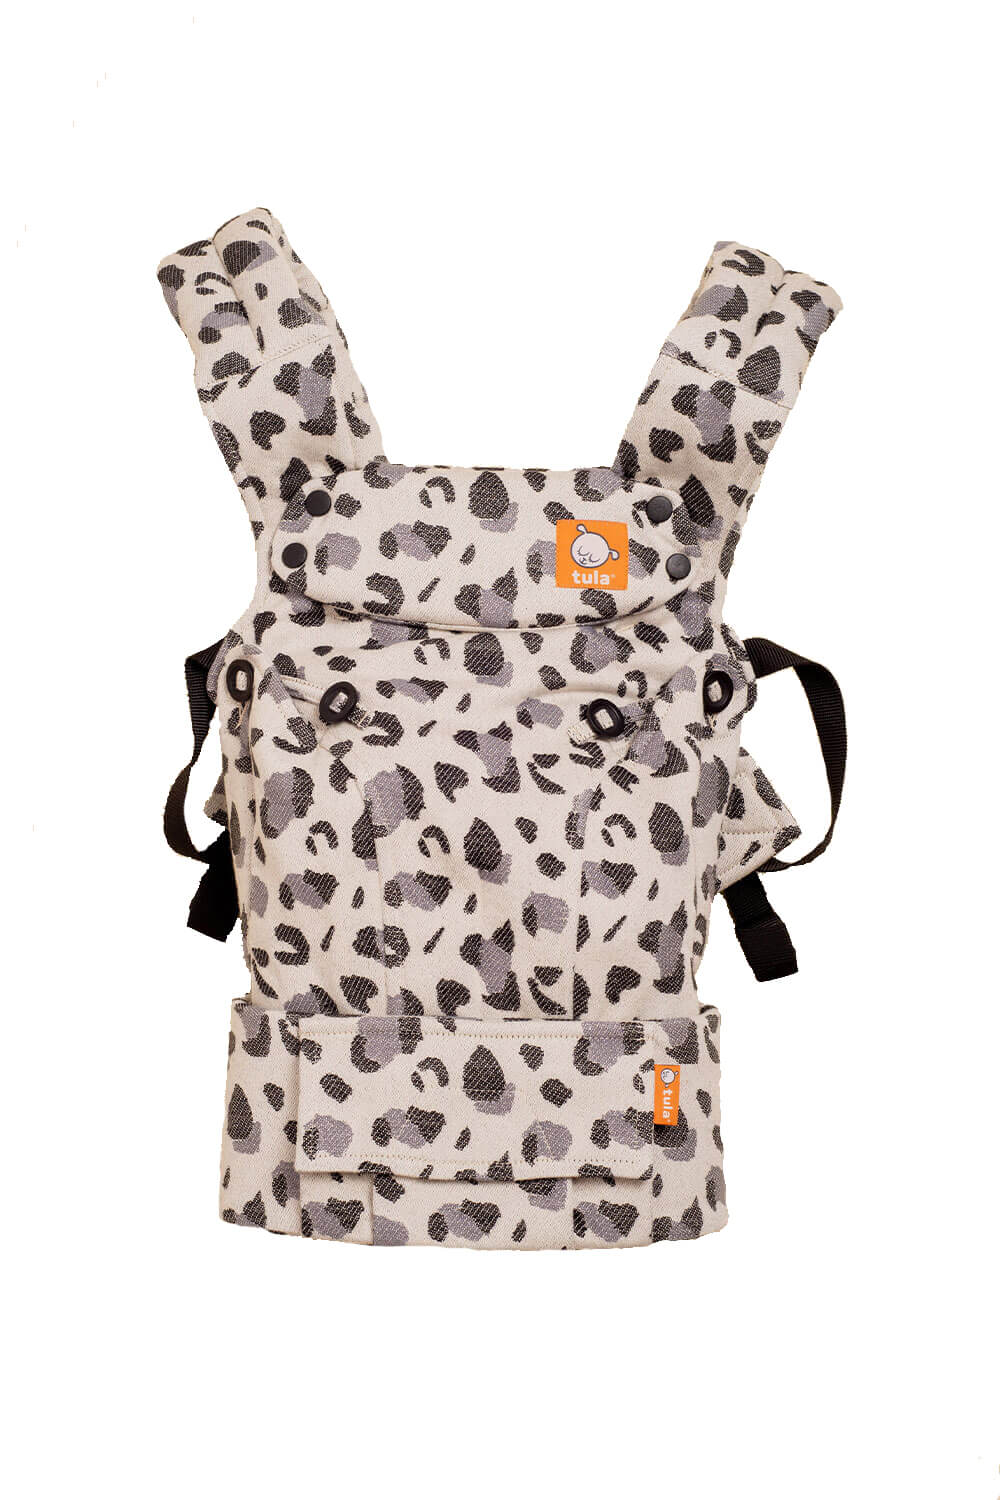 Snow Leopard Baby Carrier